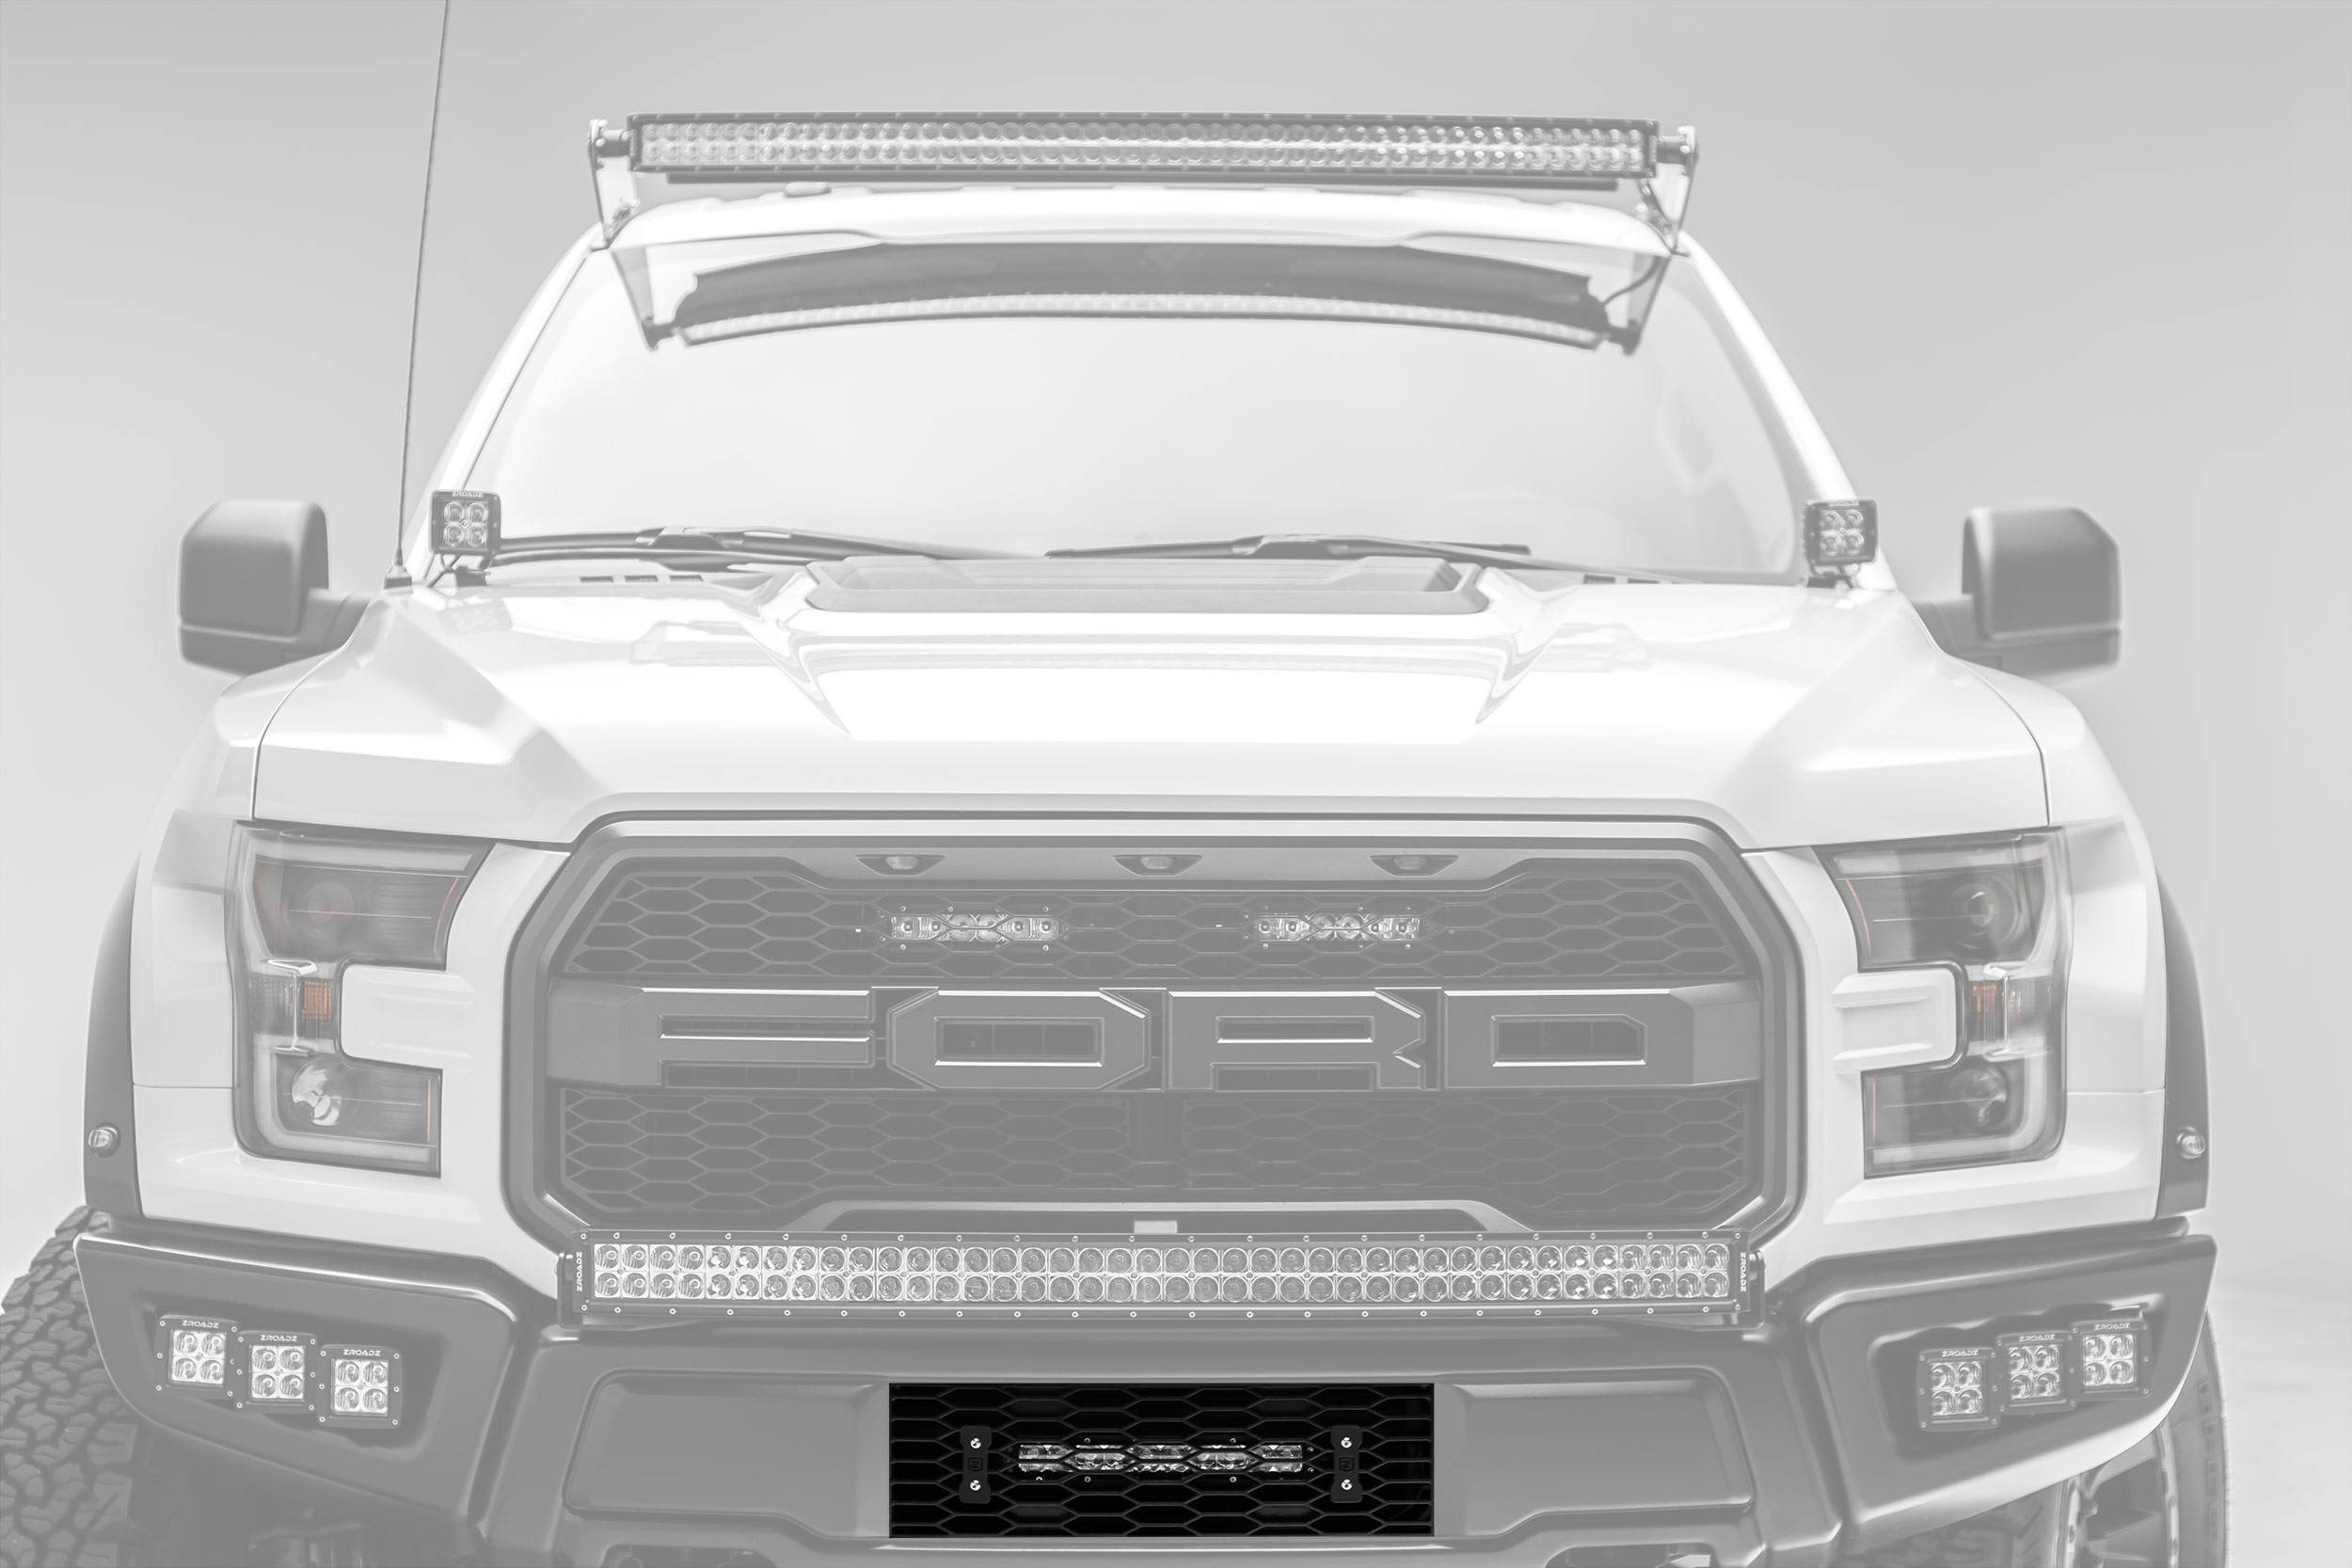 ZROADZ OFF ROAD PRODUCTS - 2017-2020 Ford F-150 Raptor OEM Bumper Grille LED Kit with 10 Inch LED Single Row Slim Light Bar - Part # Z415661-KIT